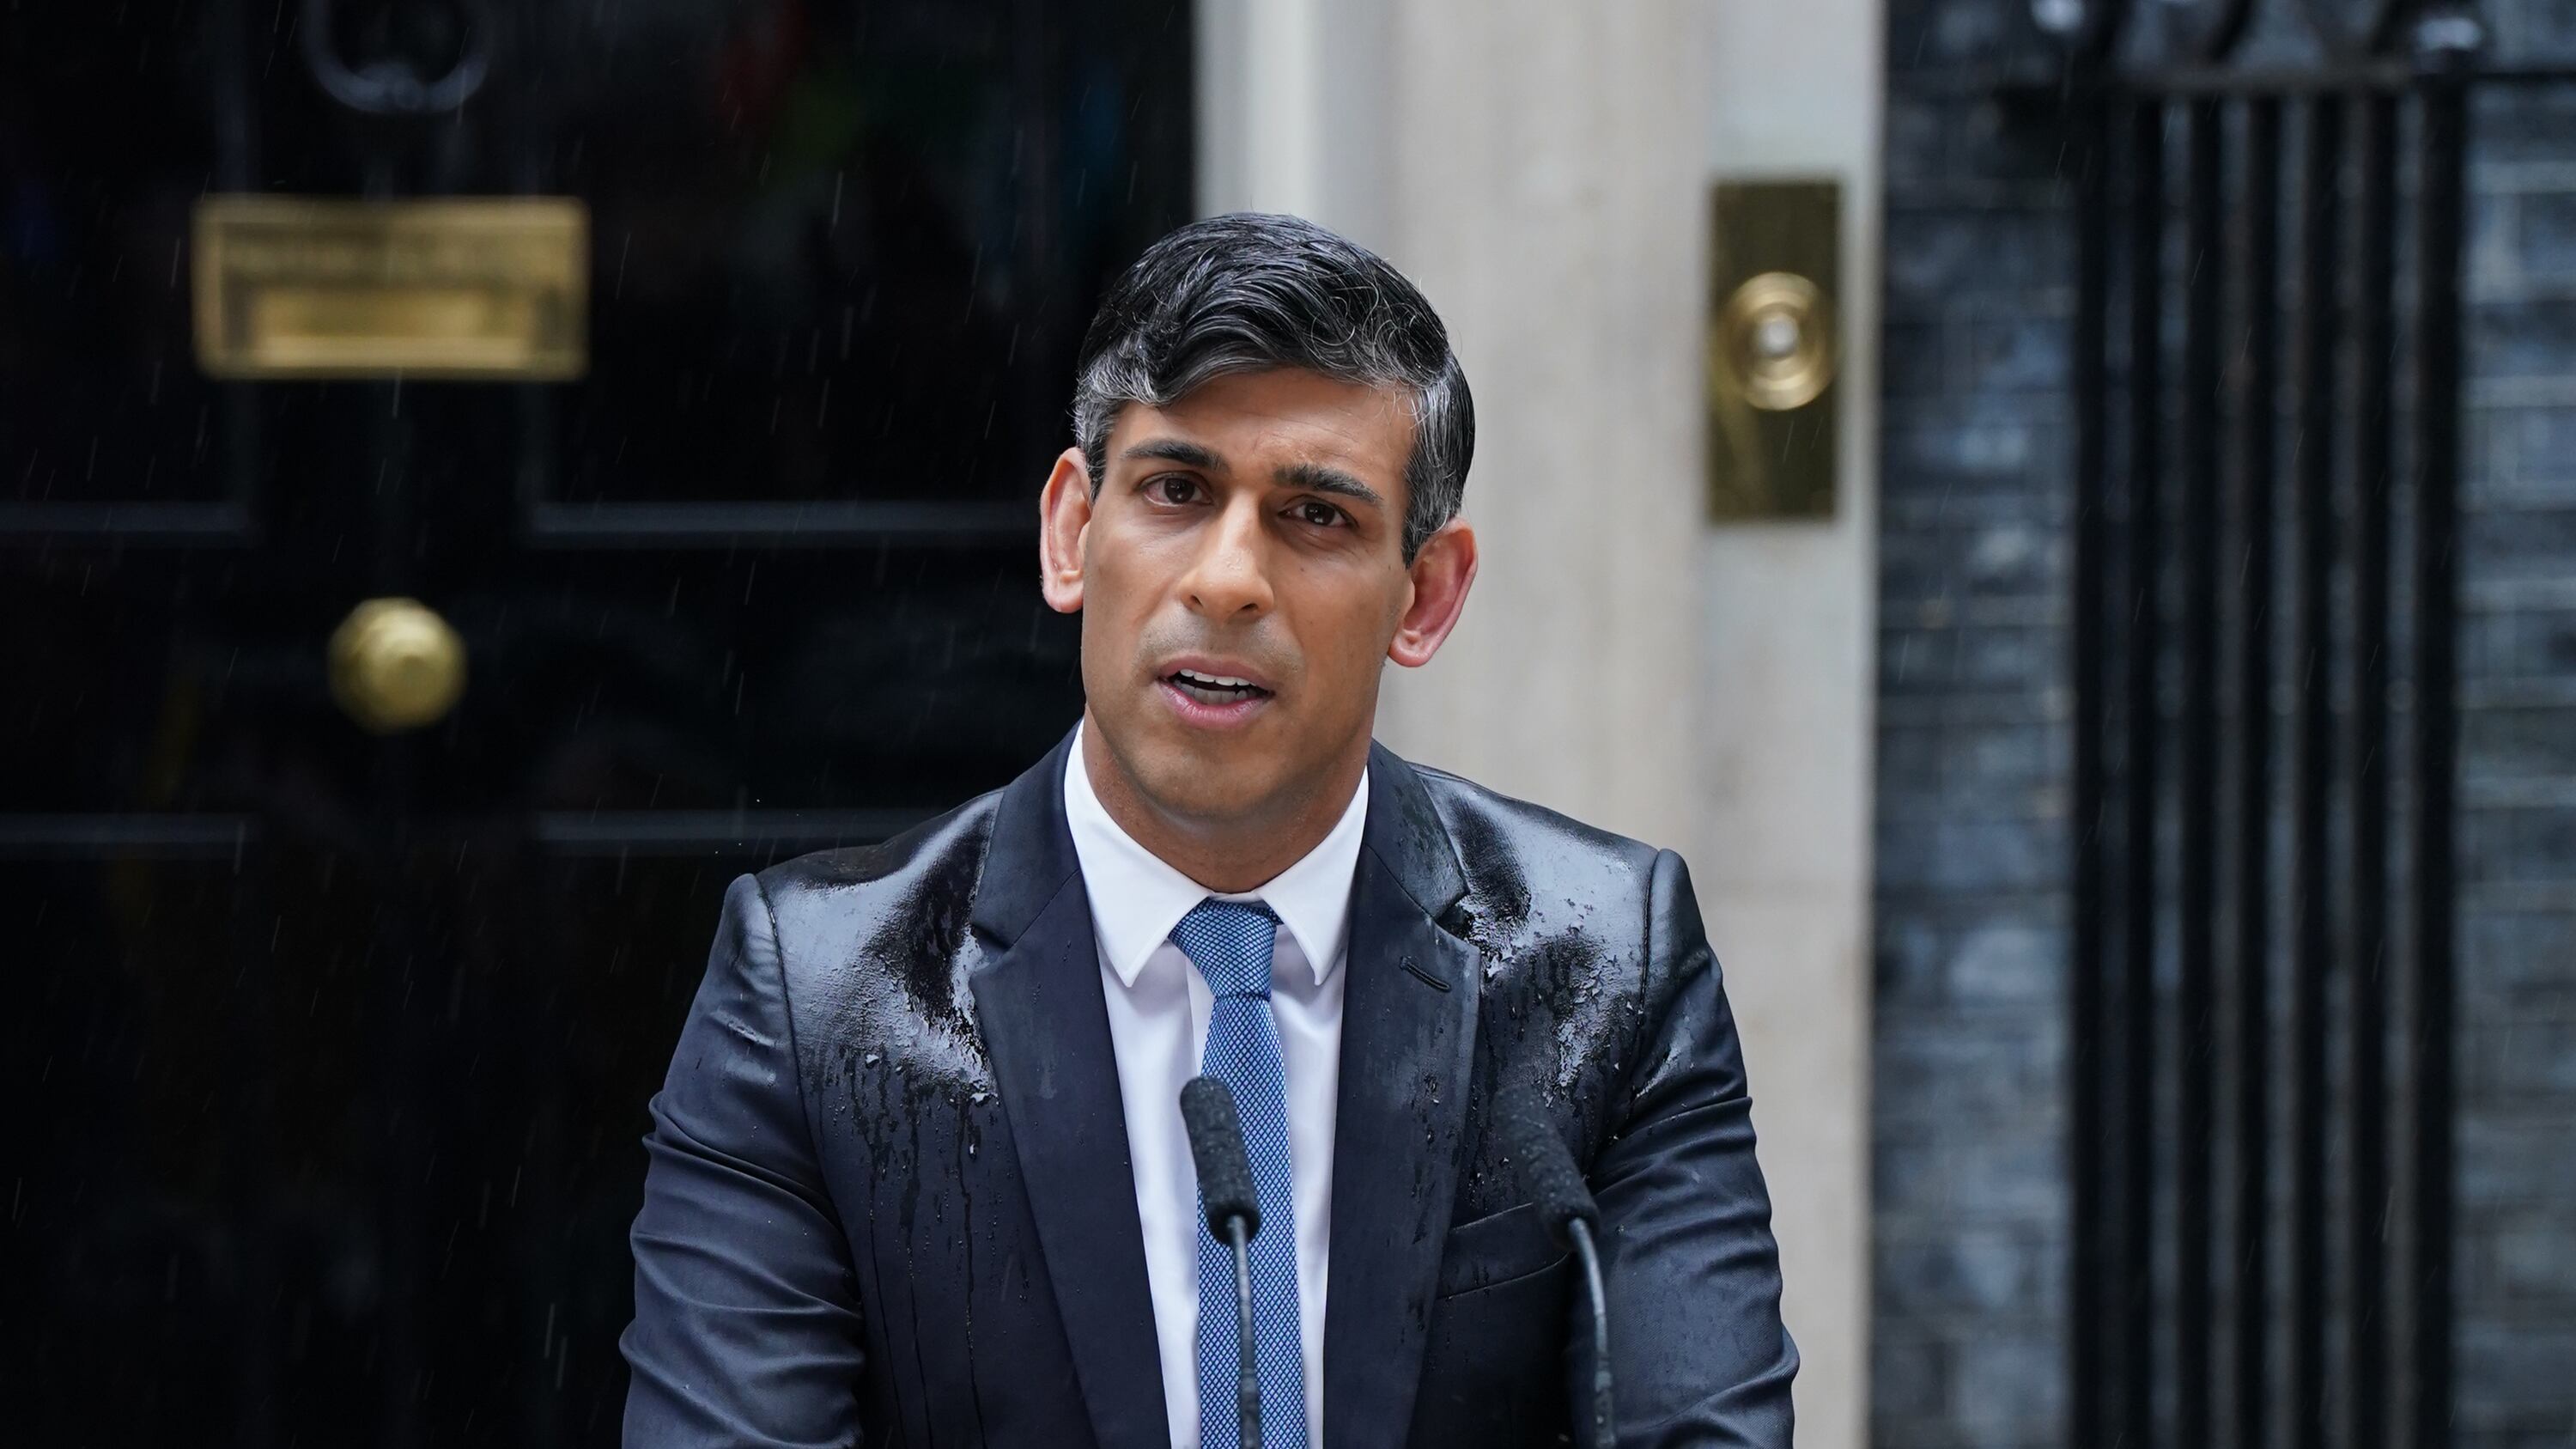 Prime Minister Rishi Sunak was soaked while making a speech outside No 10